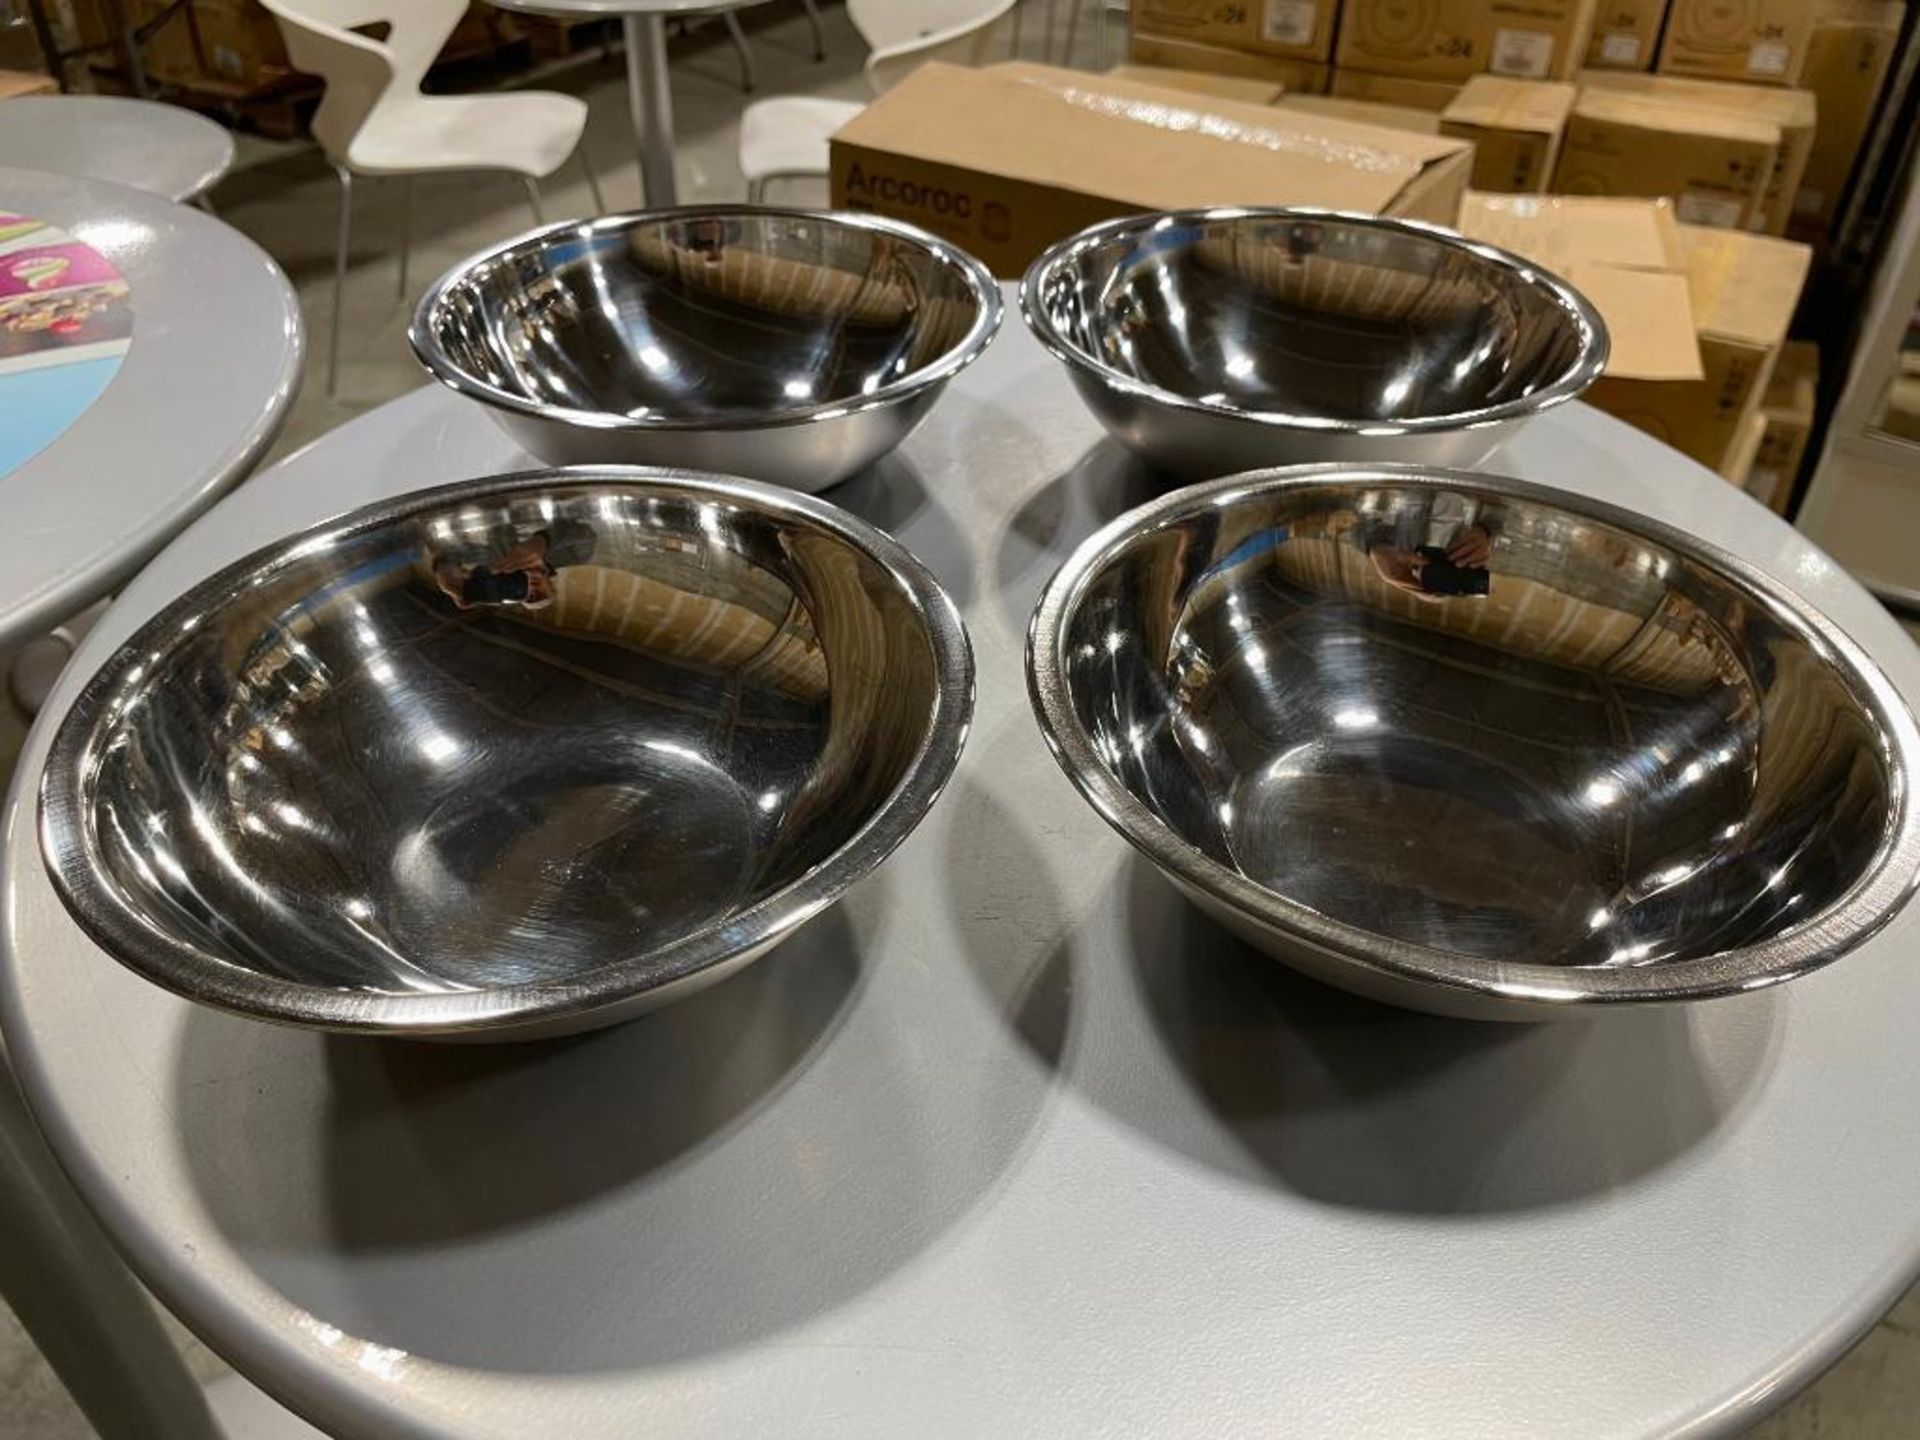 HEAVY DUTY STAINLESS STEEL MIXING BOWL 1 QT - LOT OF 4 - JOHNSON ROSE 7530 - Image 4 of 5